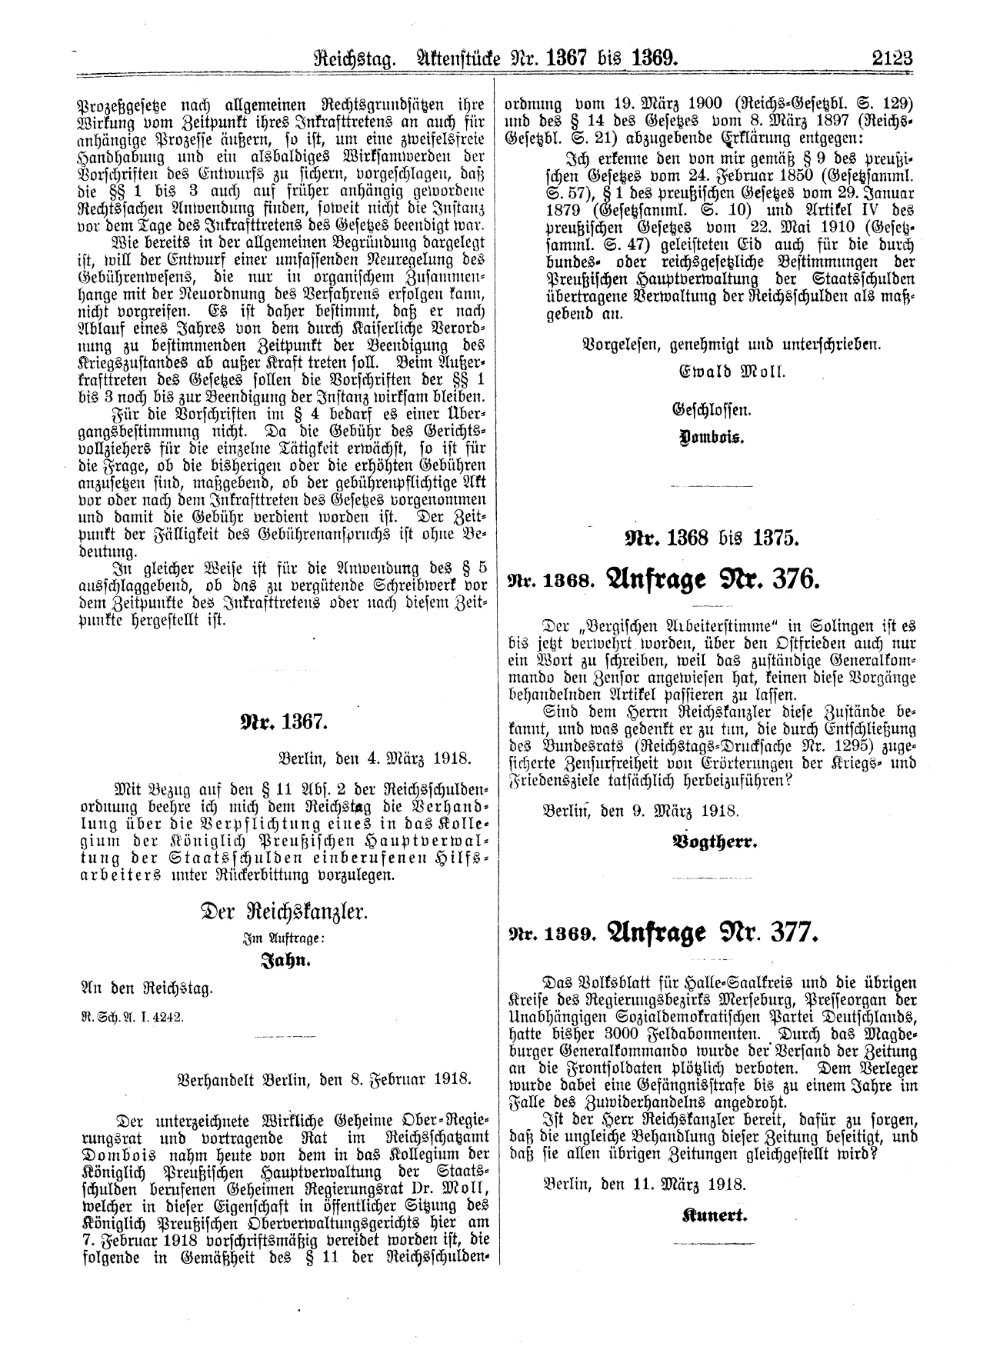 Scan of page 2123